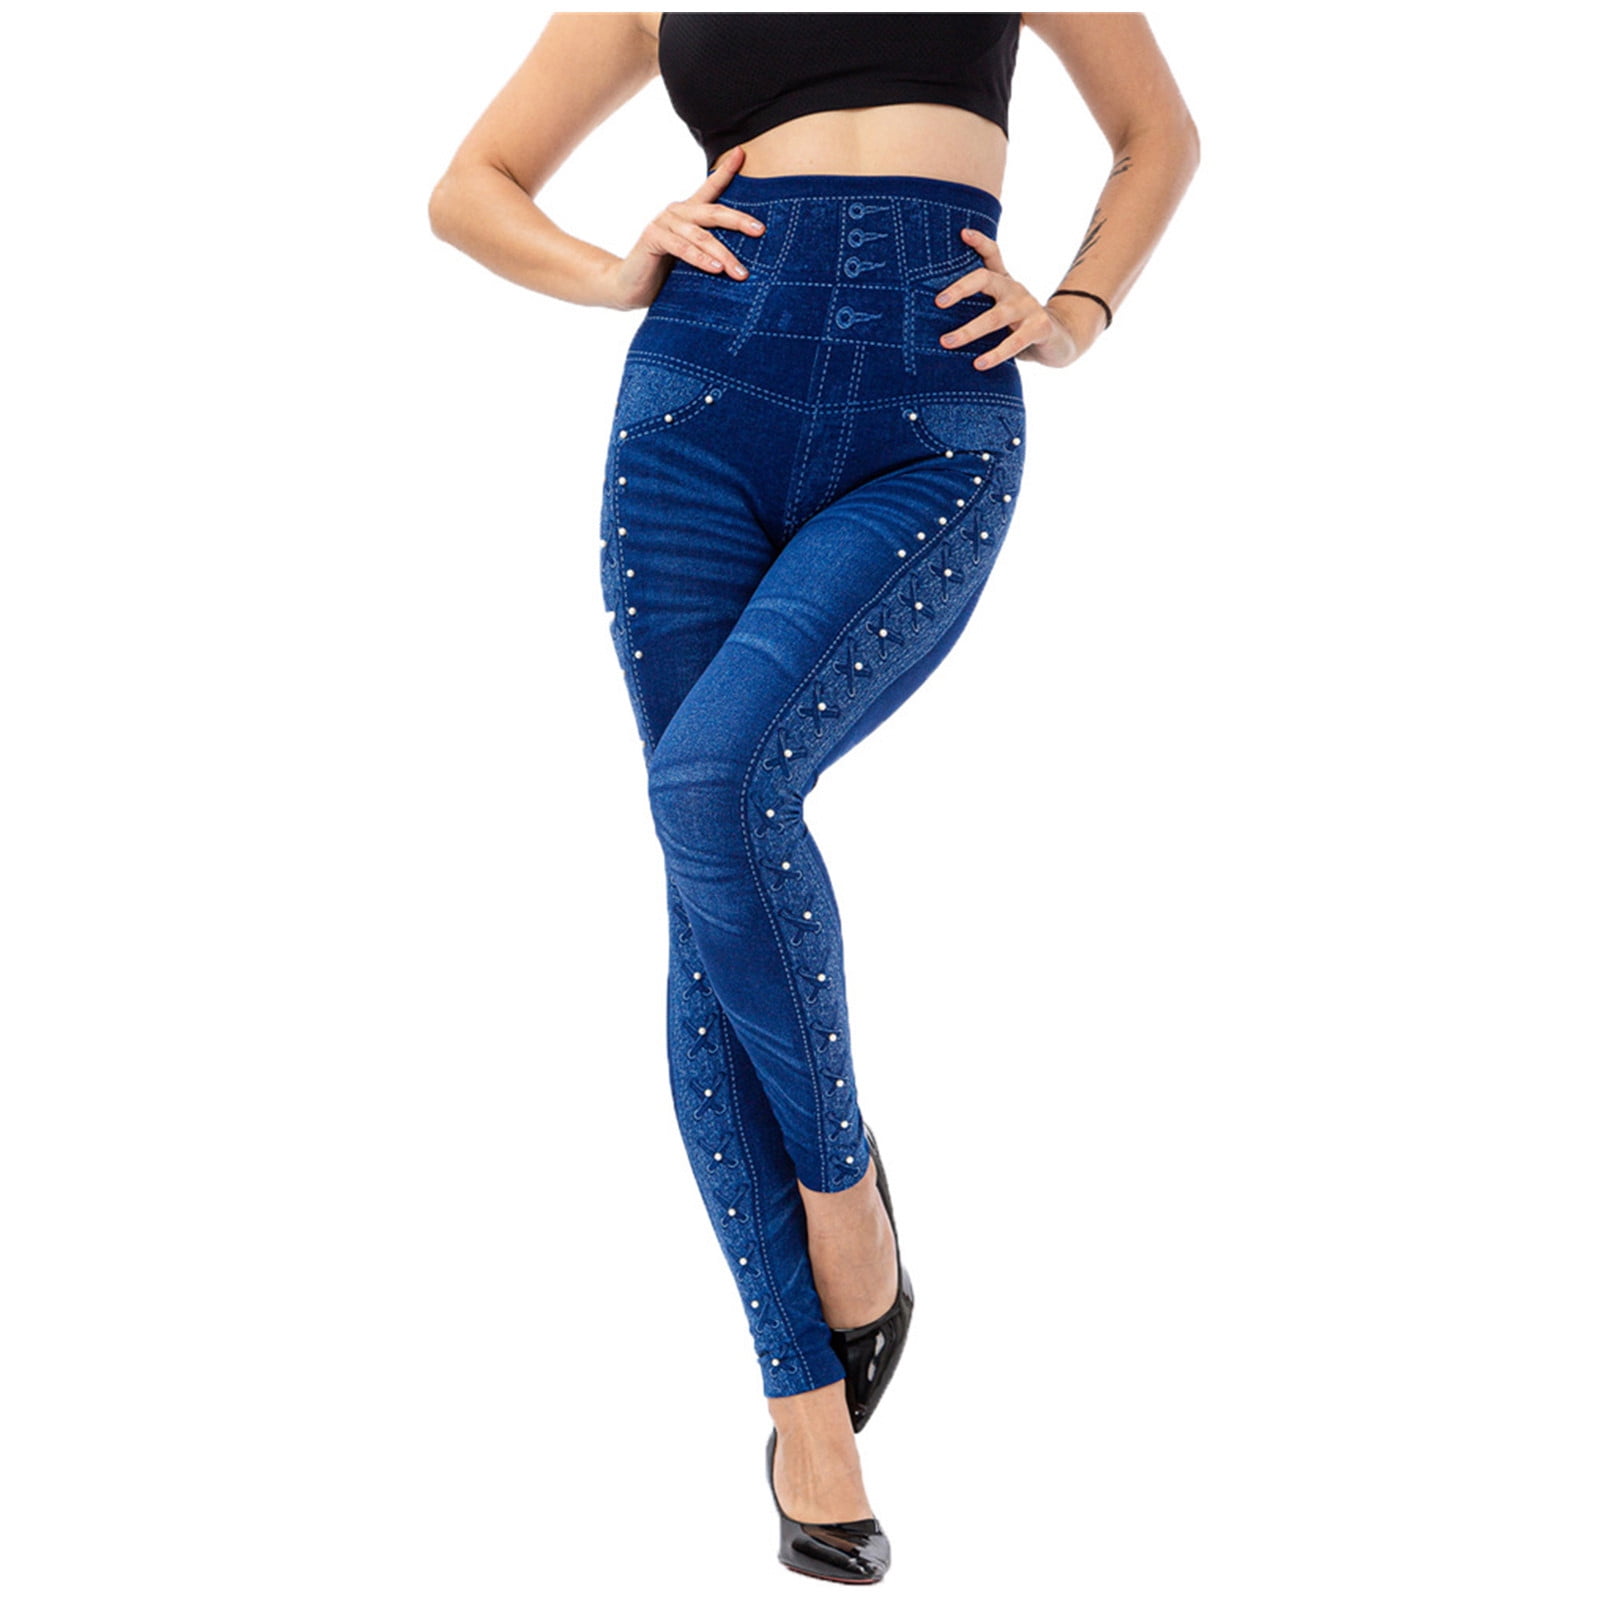 Buy the NWT Womens Blue High Waisted Skinny Leg Compression